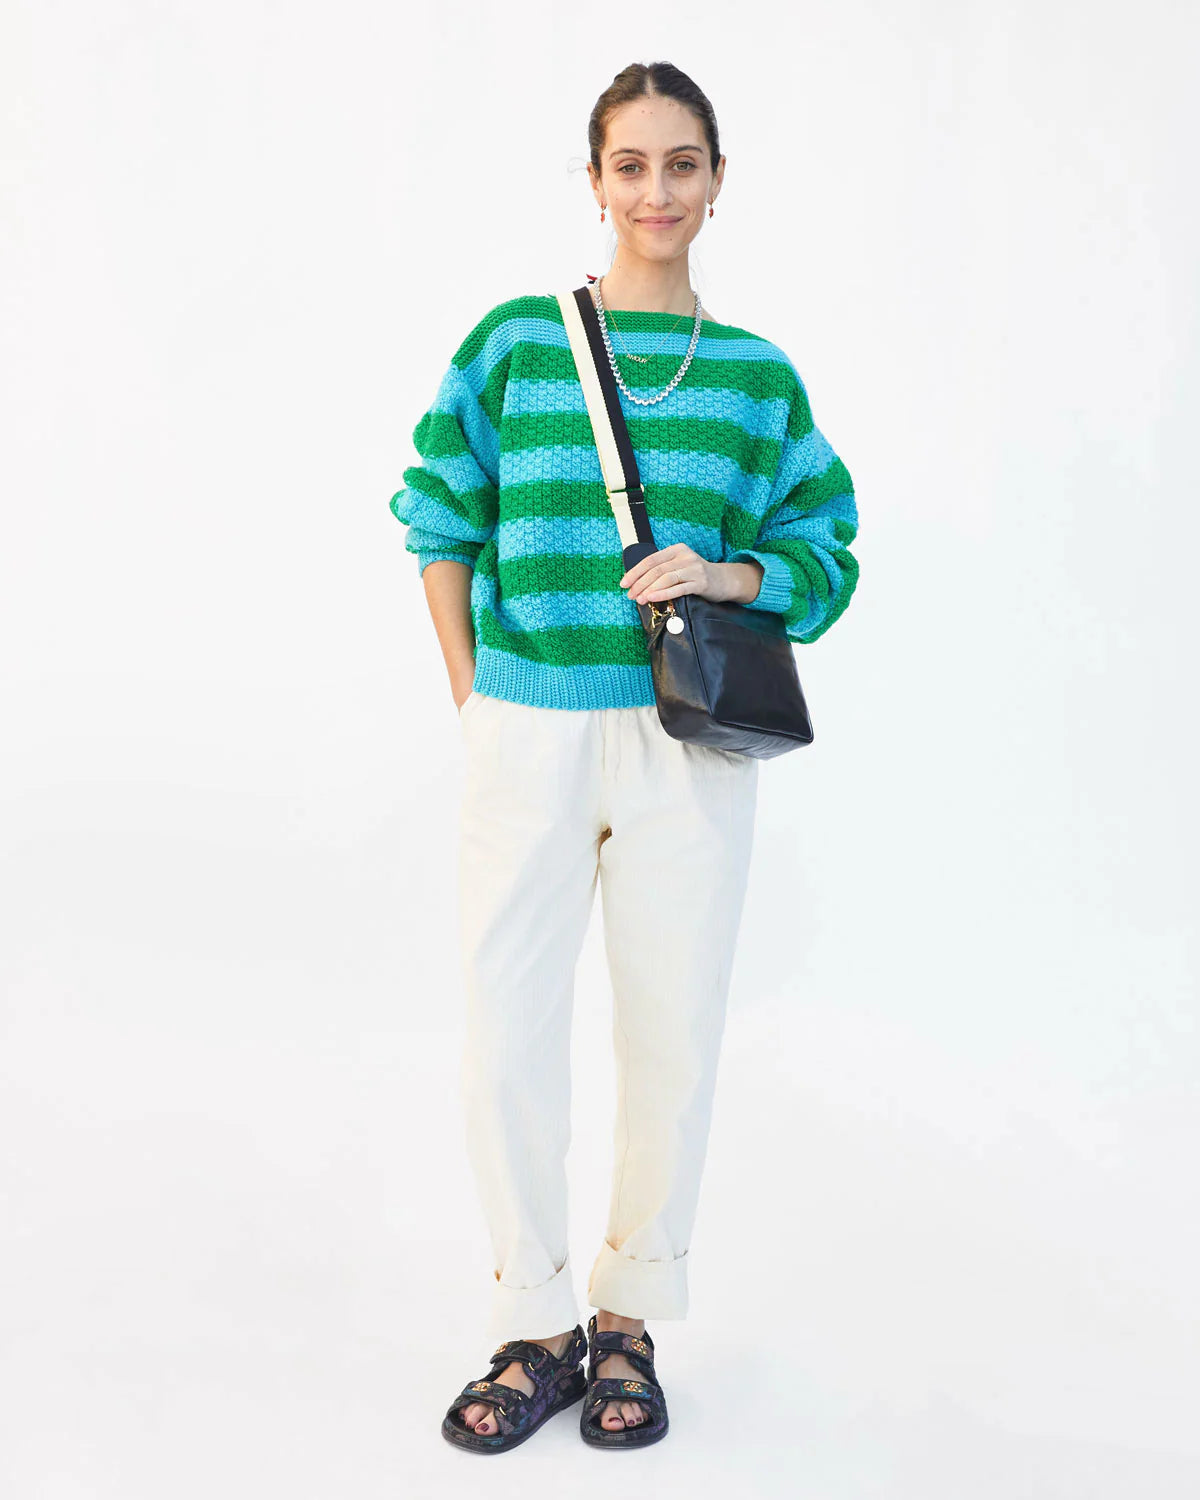 A woman stands against a white background with her hand in her pocket. She is wearing a green and blue striped sweater, white pants, black sandals, and a black crossbody bag with a Clare Vivier Crossbody Strap. Her hair is tied back, and she is smiling.